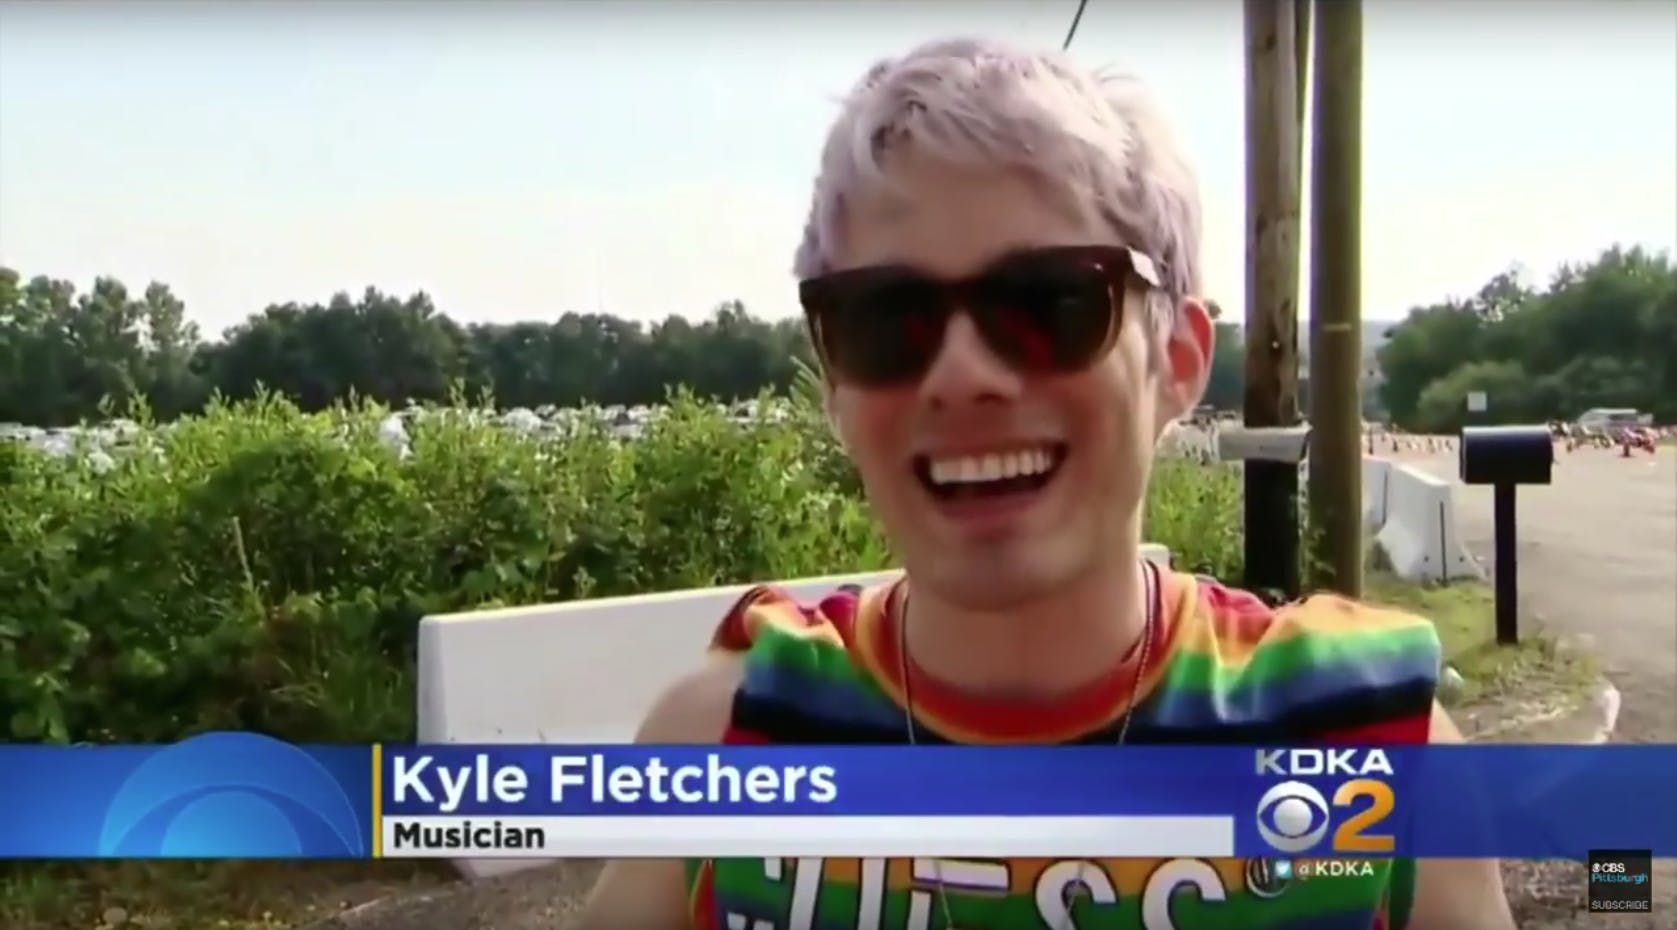 Waterparks' Awsten Knight Releases Song For Fake Band After Pranking U.S. News Channel